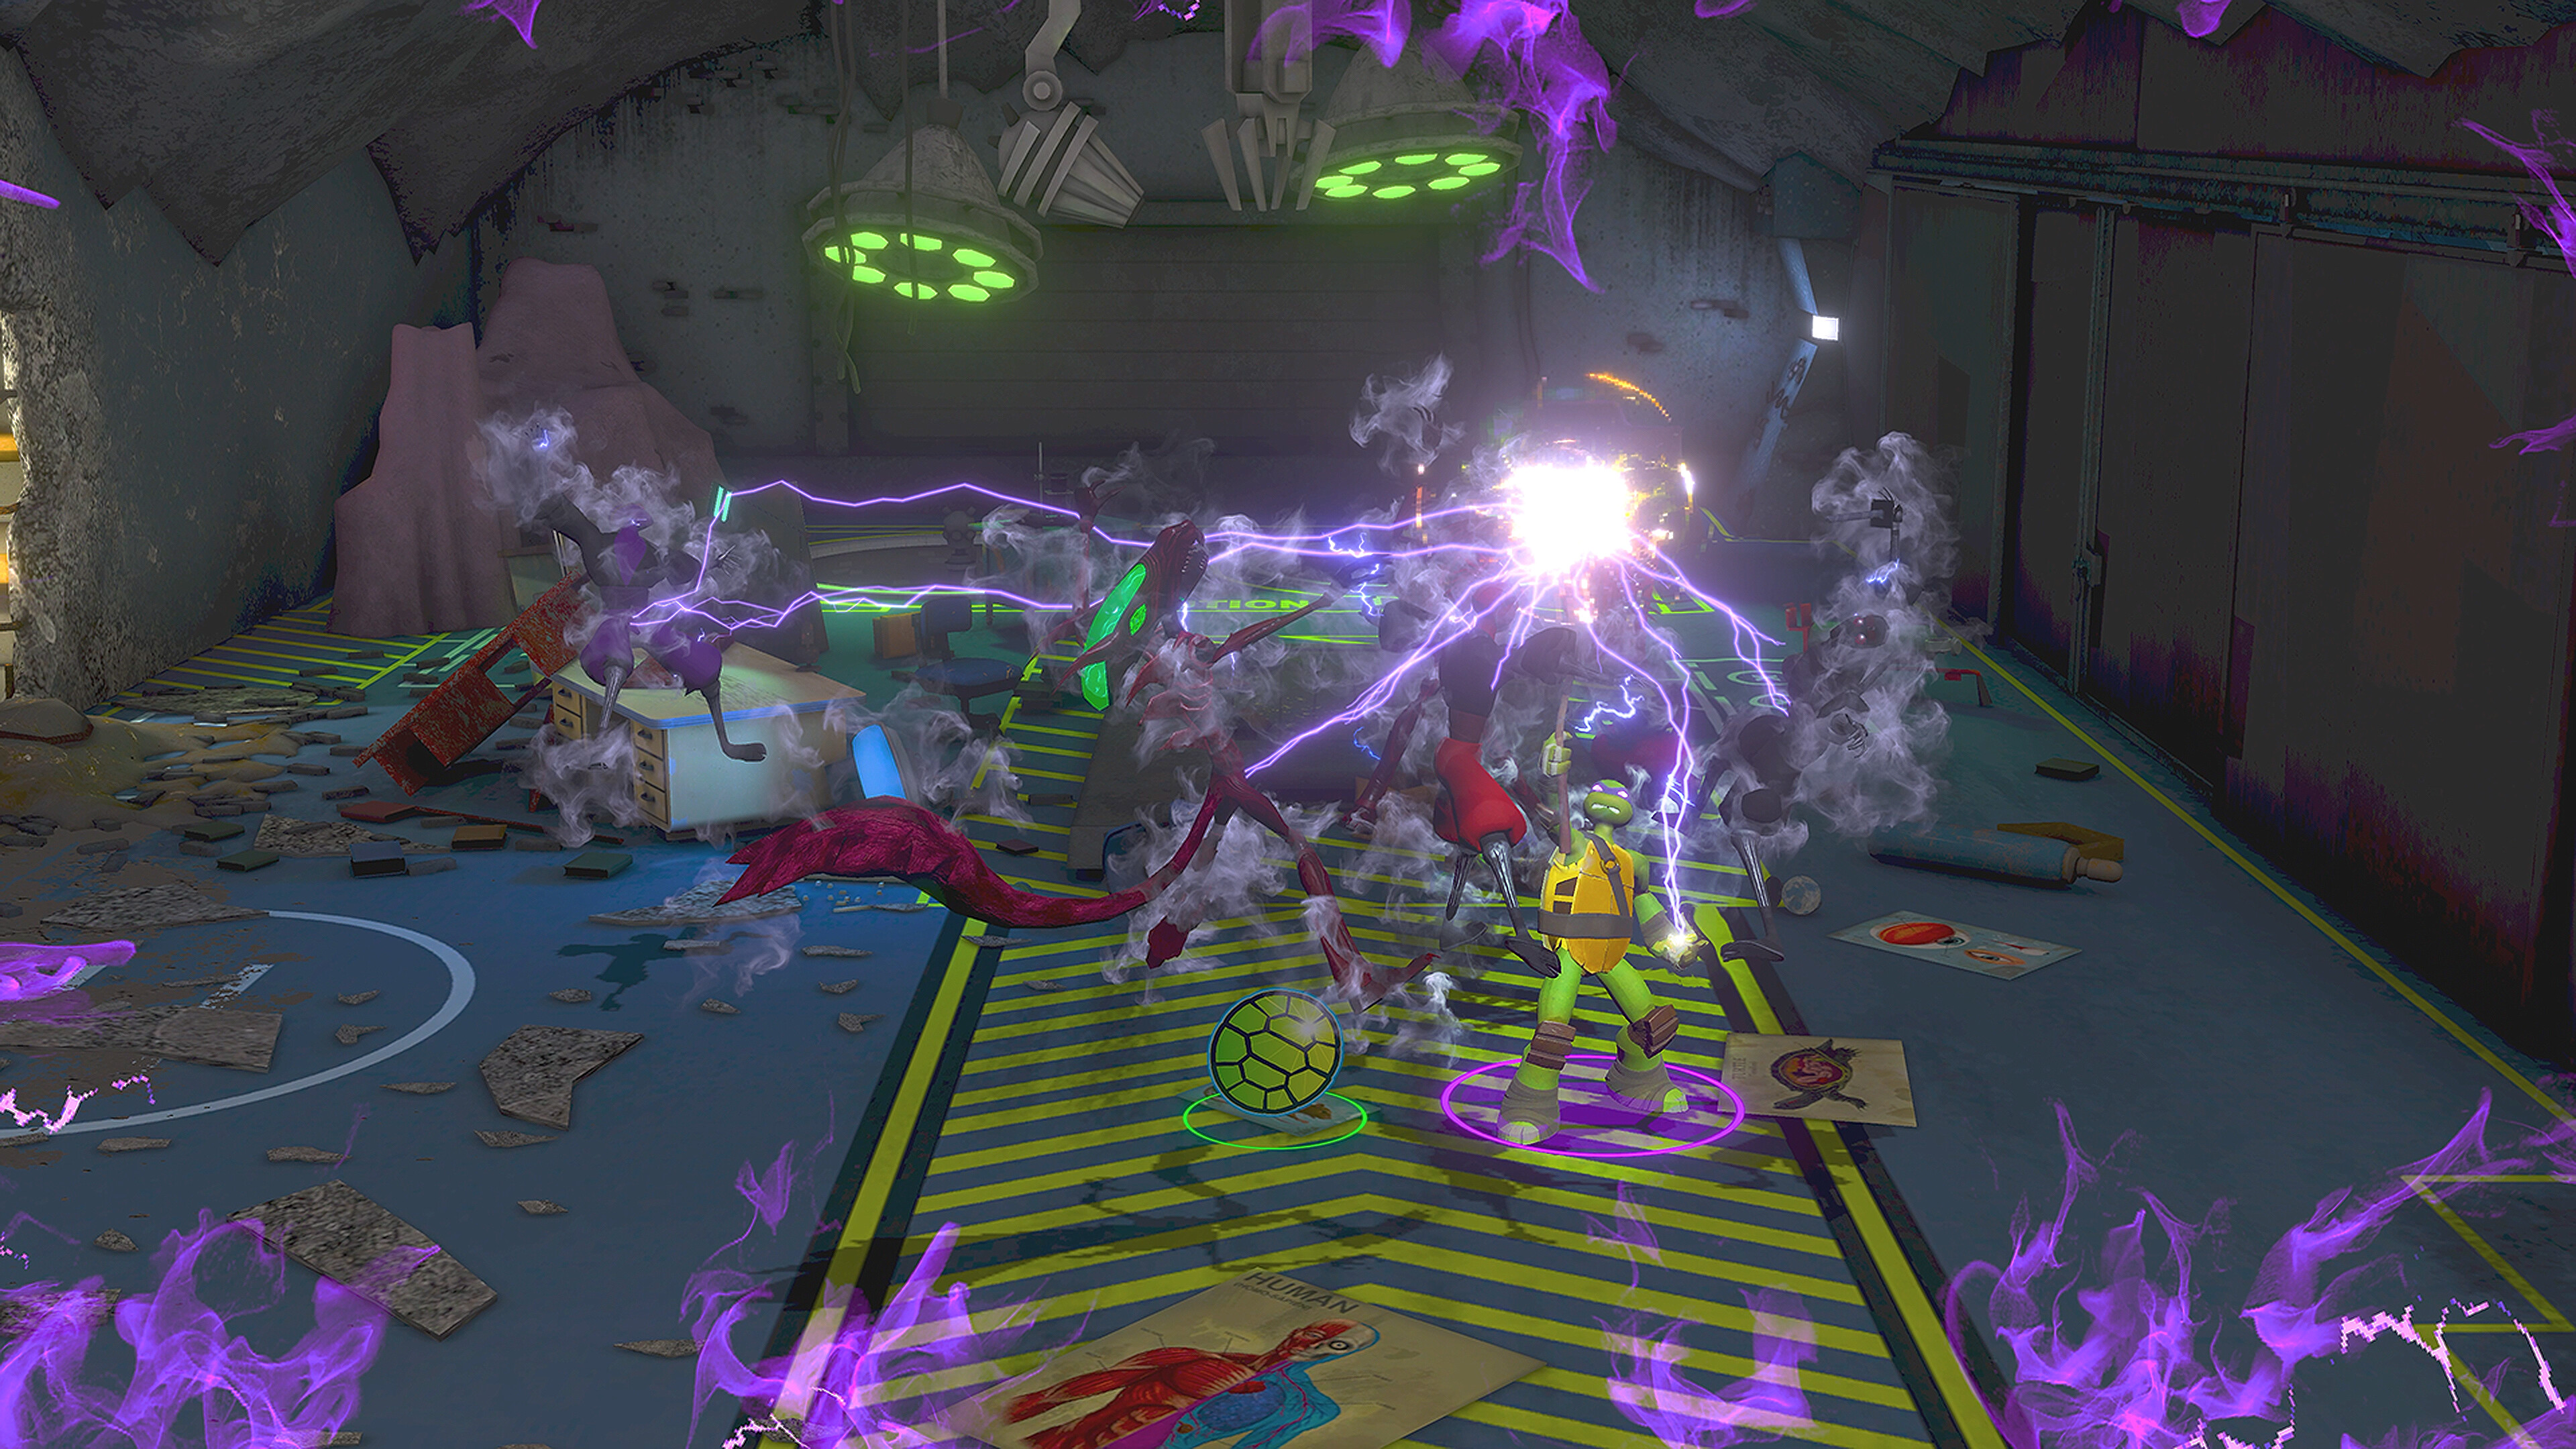 Donatello using a lightning power in Wrath of the Mutants.